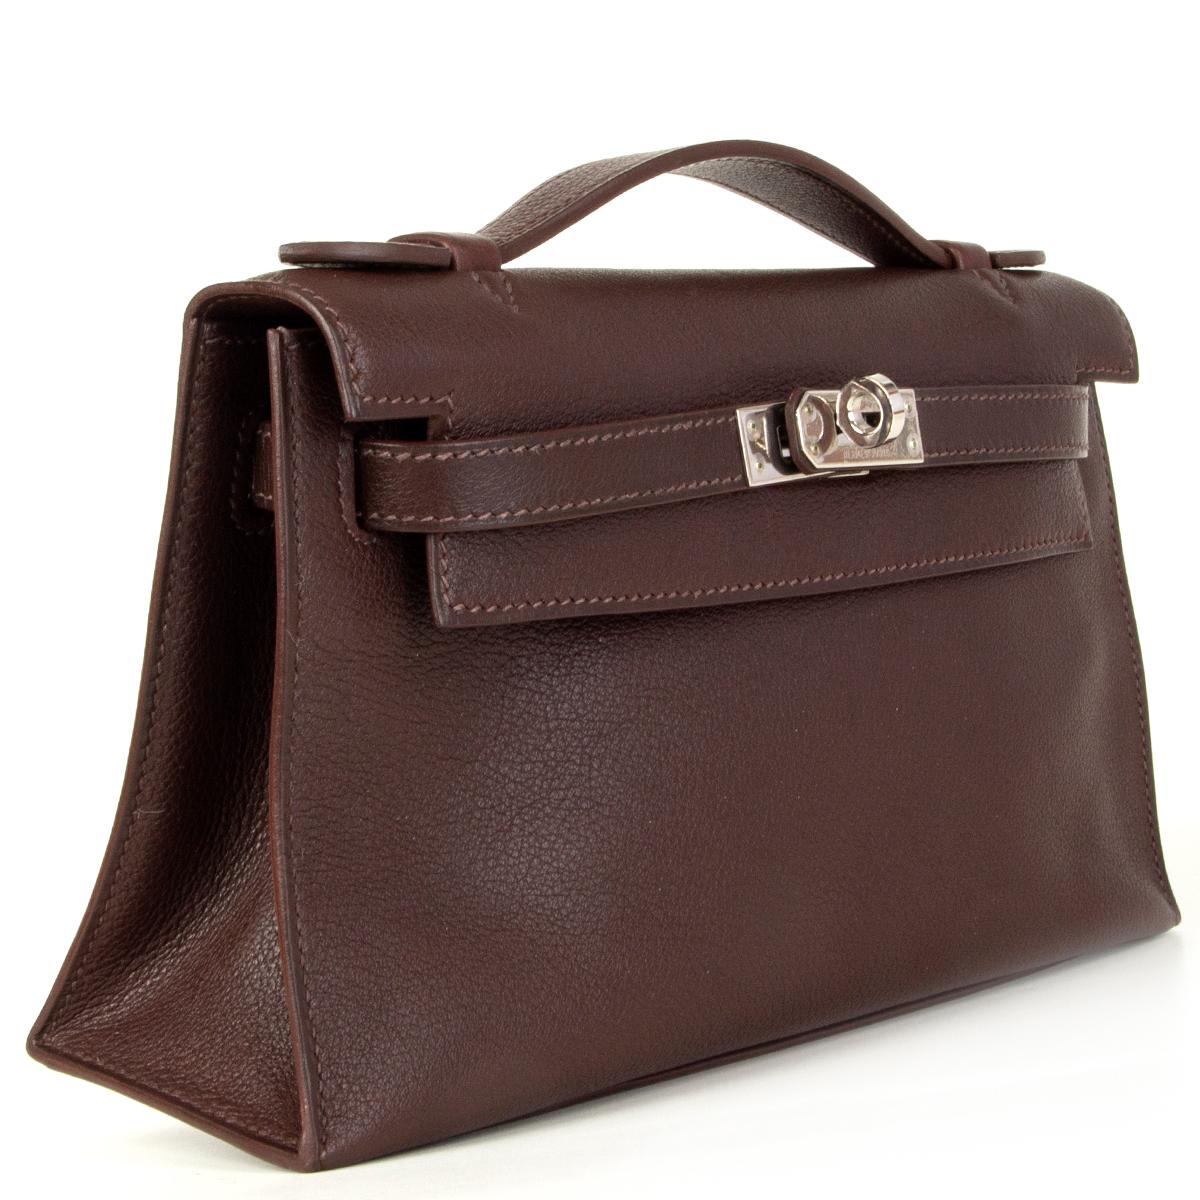 Hermès 'Kelly Pochett' clutch in Havane (chestnut brown) Vea Swift leather with palladium hardware. Lines in Chevre (goat skin) with an open pocket against the back. Brand new comes with dust bag. 

Height 14cm (5.5in)
Width 22cm (8.6in)
Depth 7cm